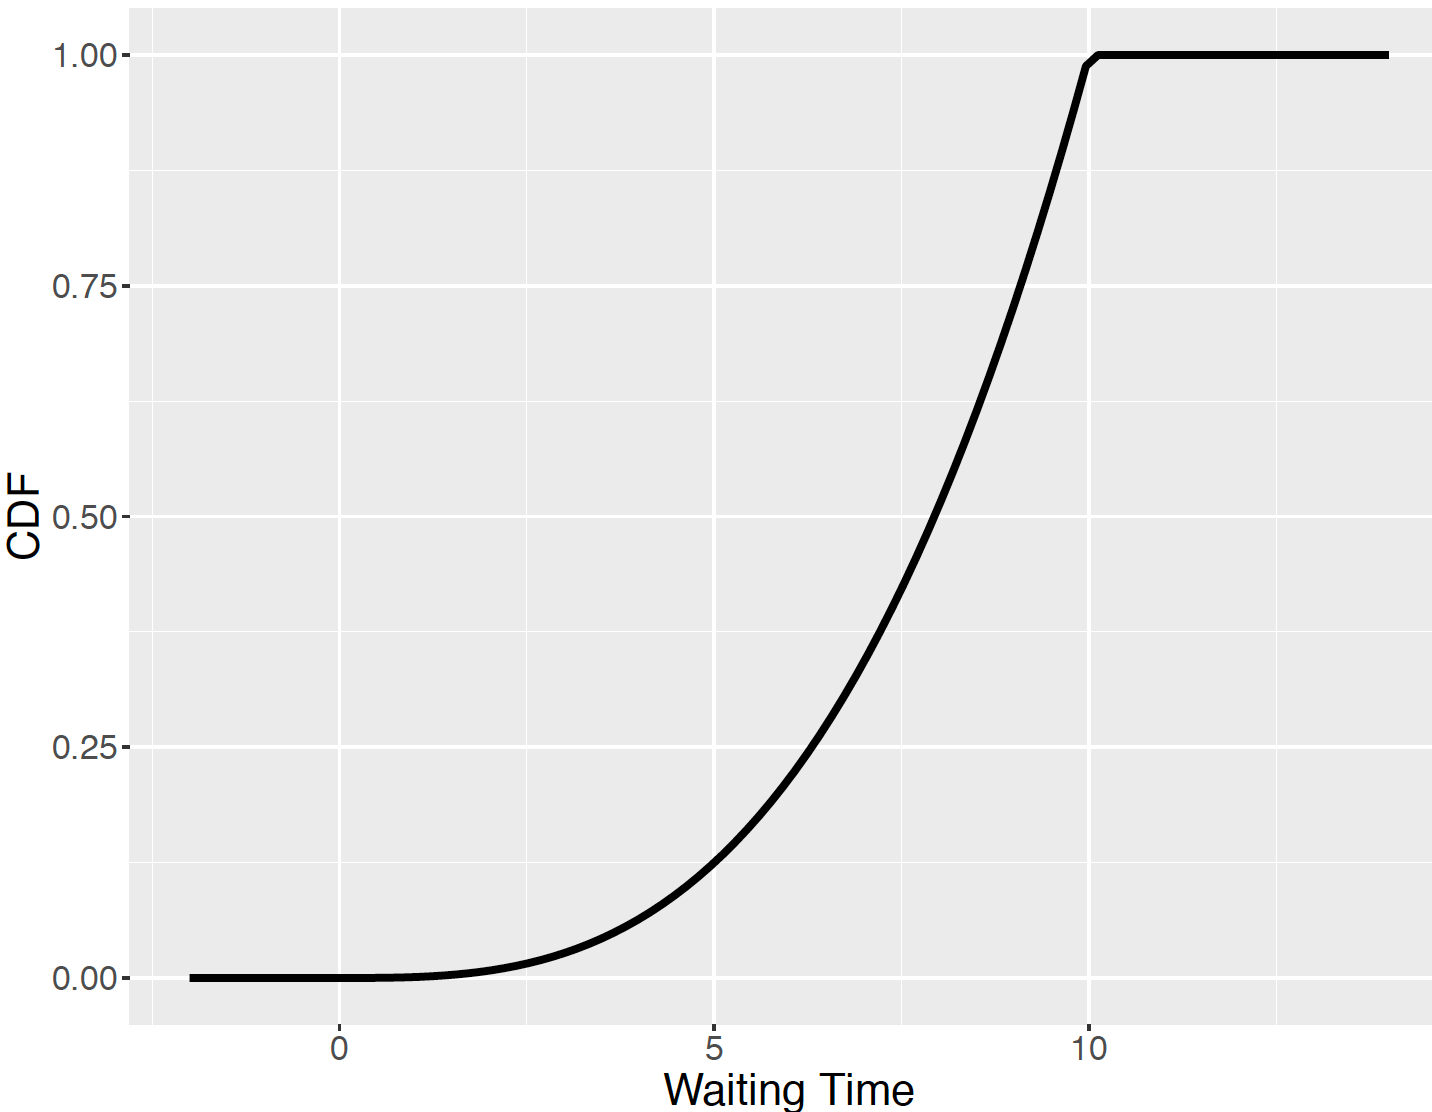 The cumulative density function, $F(x)$, of the bus waiting example.